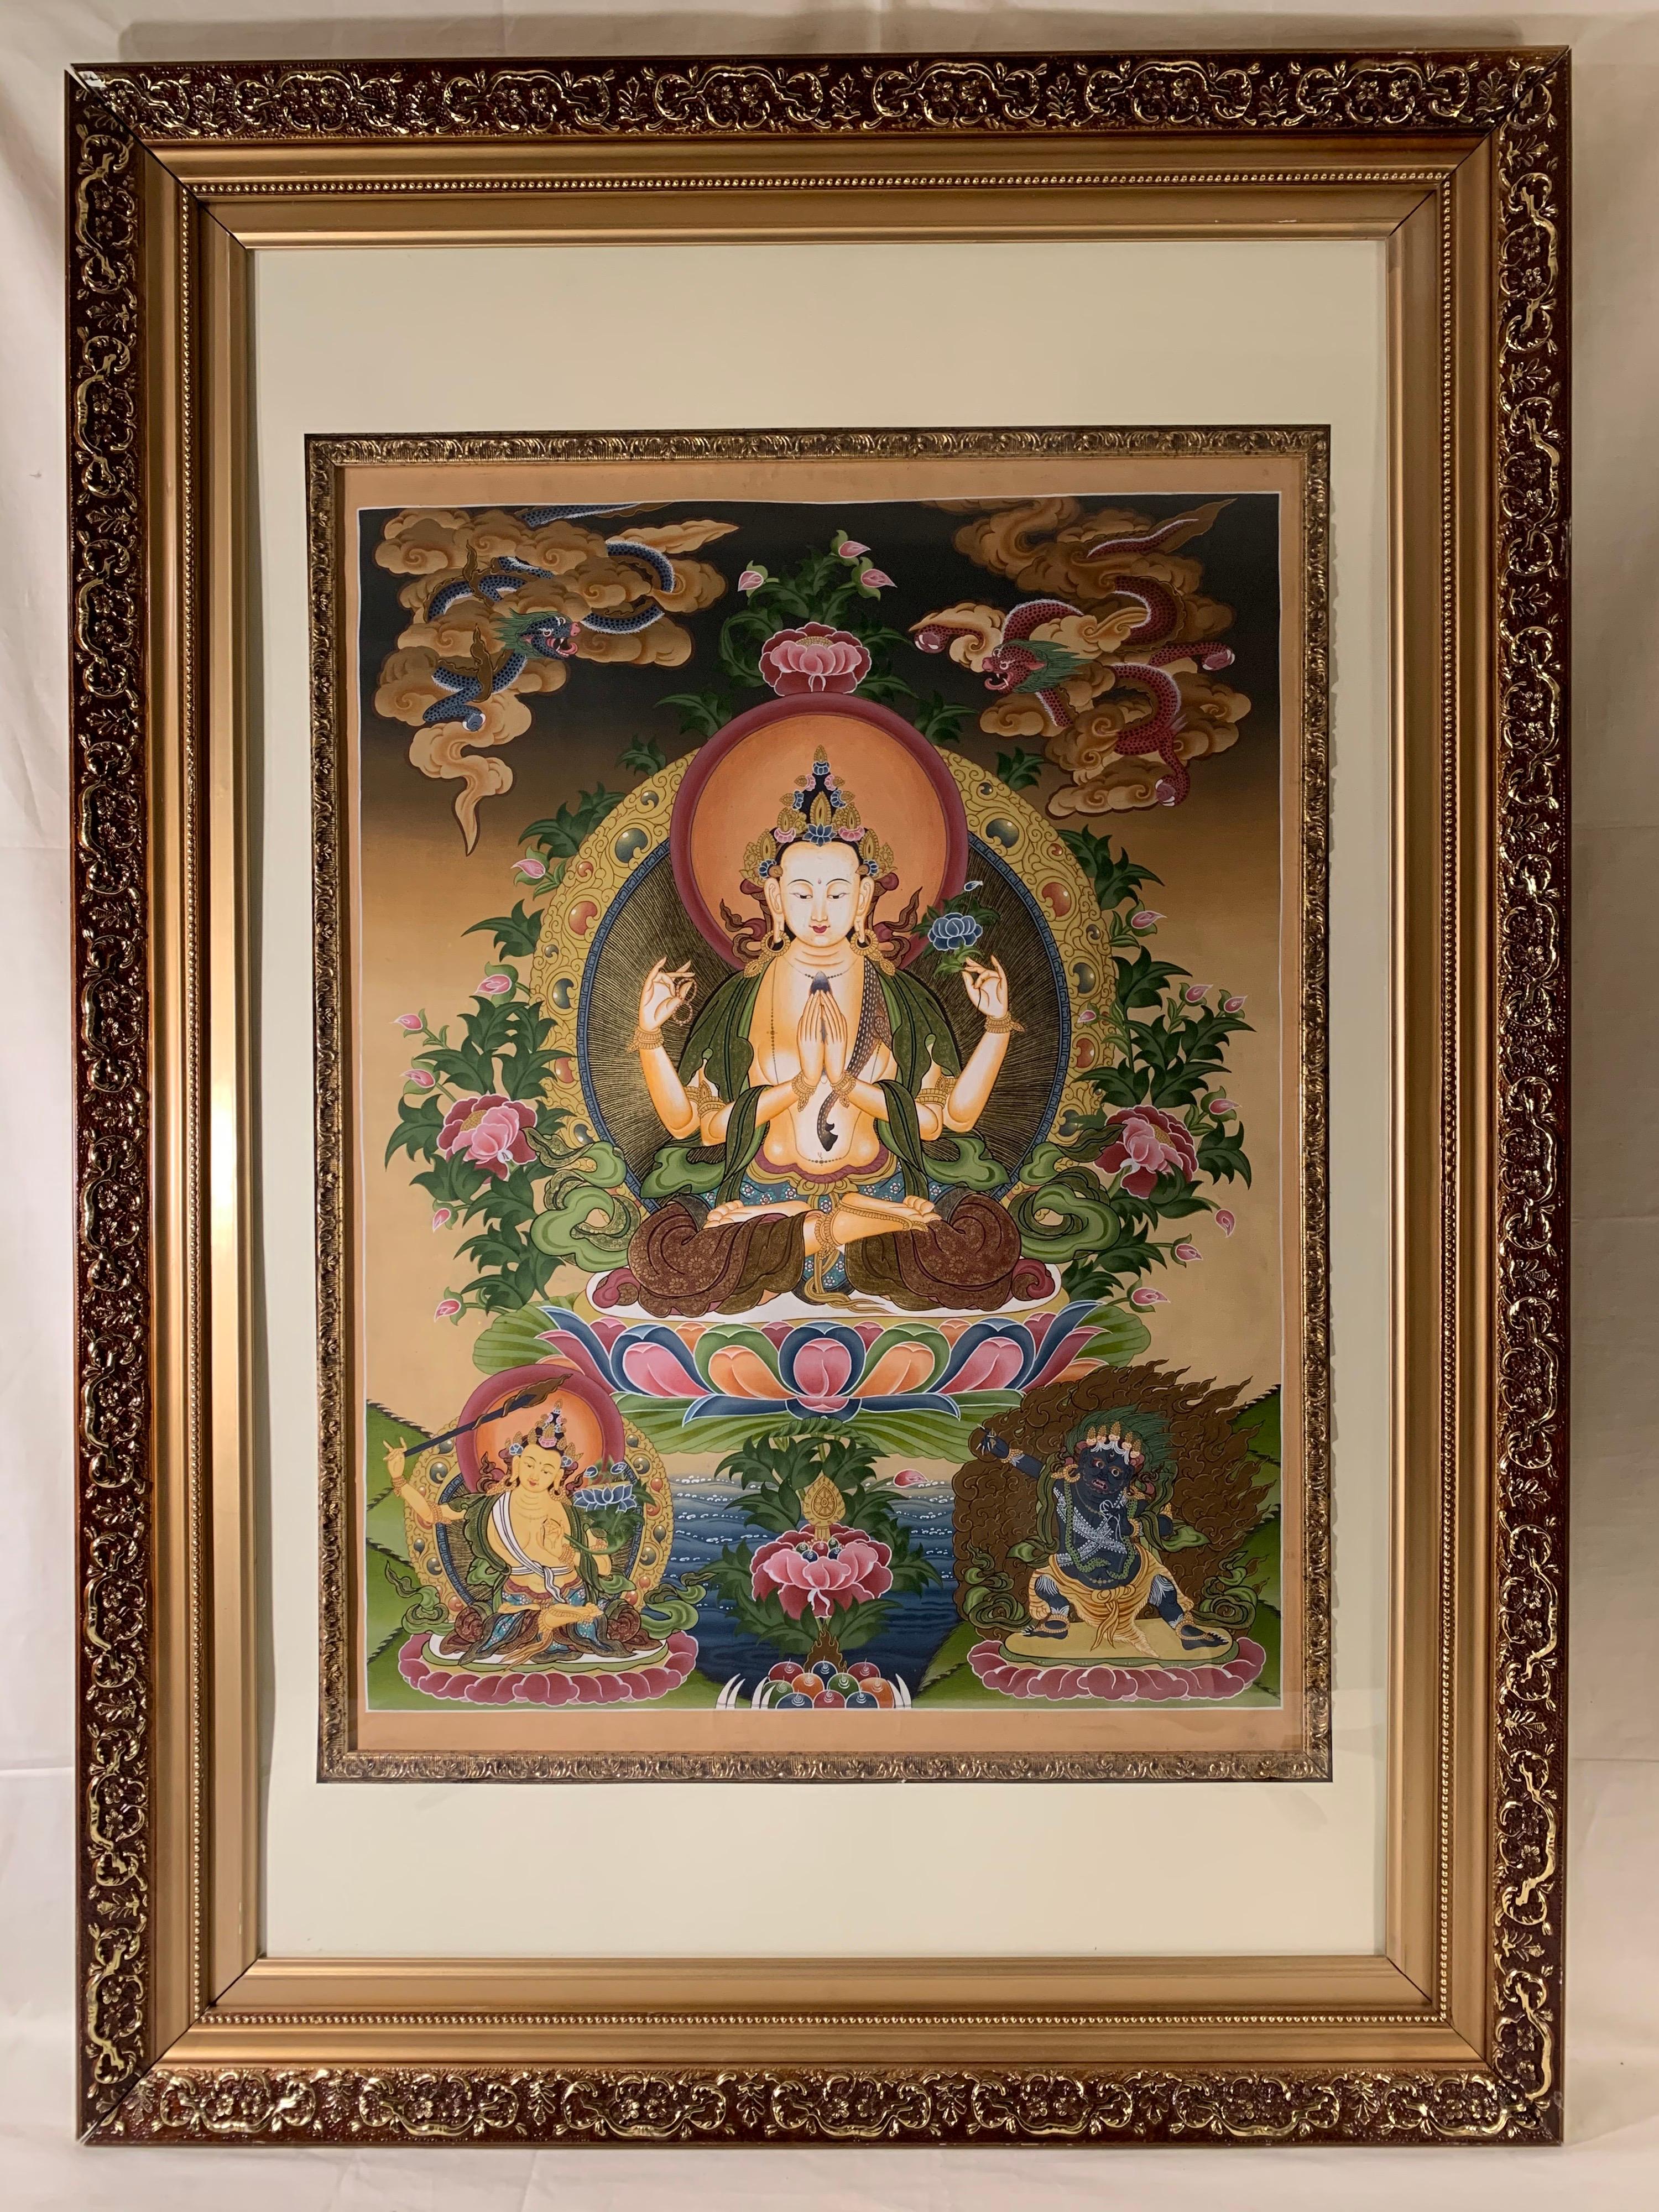 Framed Hand Painted Chenrezig Thangka on Canvas with 24K Gold - Mixed Media Art by Unknown